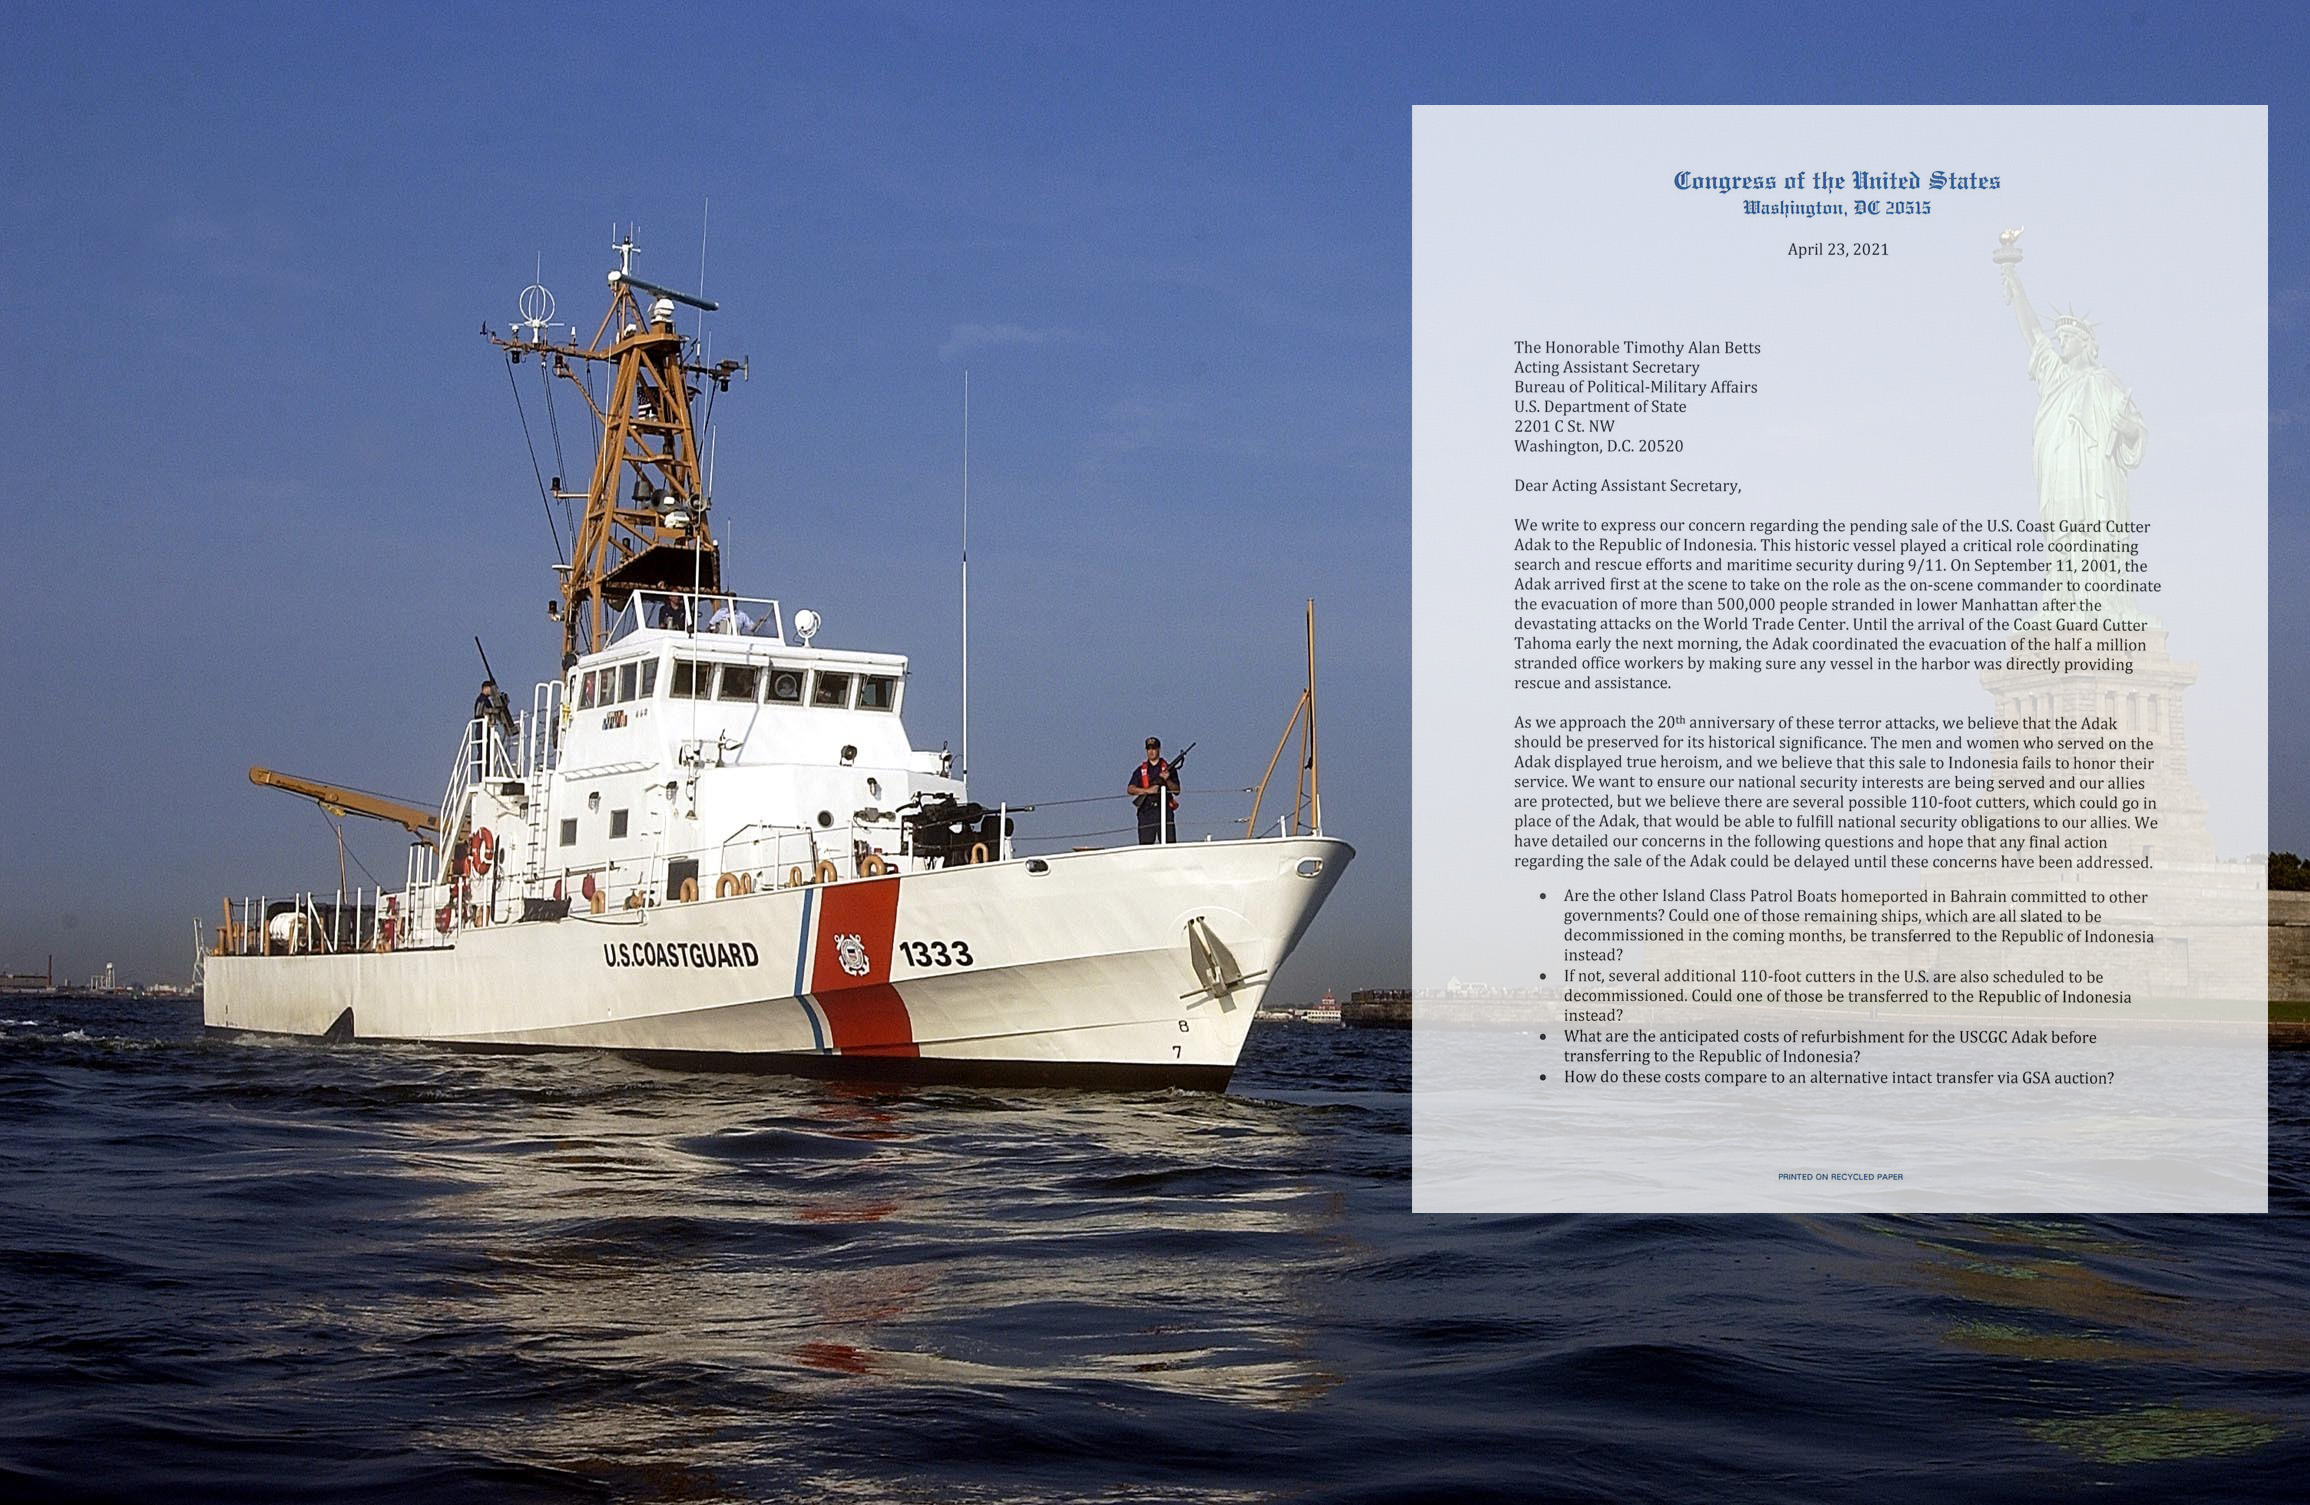 Congress take steps to help non-profit save historic Coast Guard Cutter, 9/11 artifact